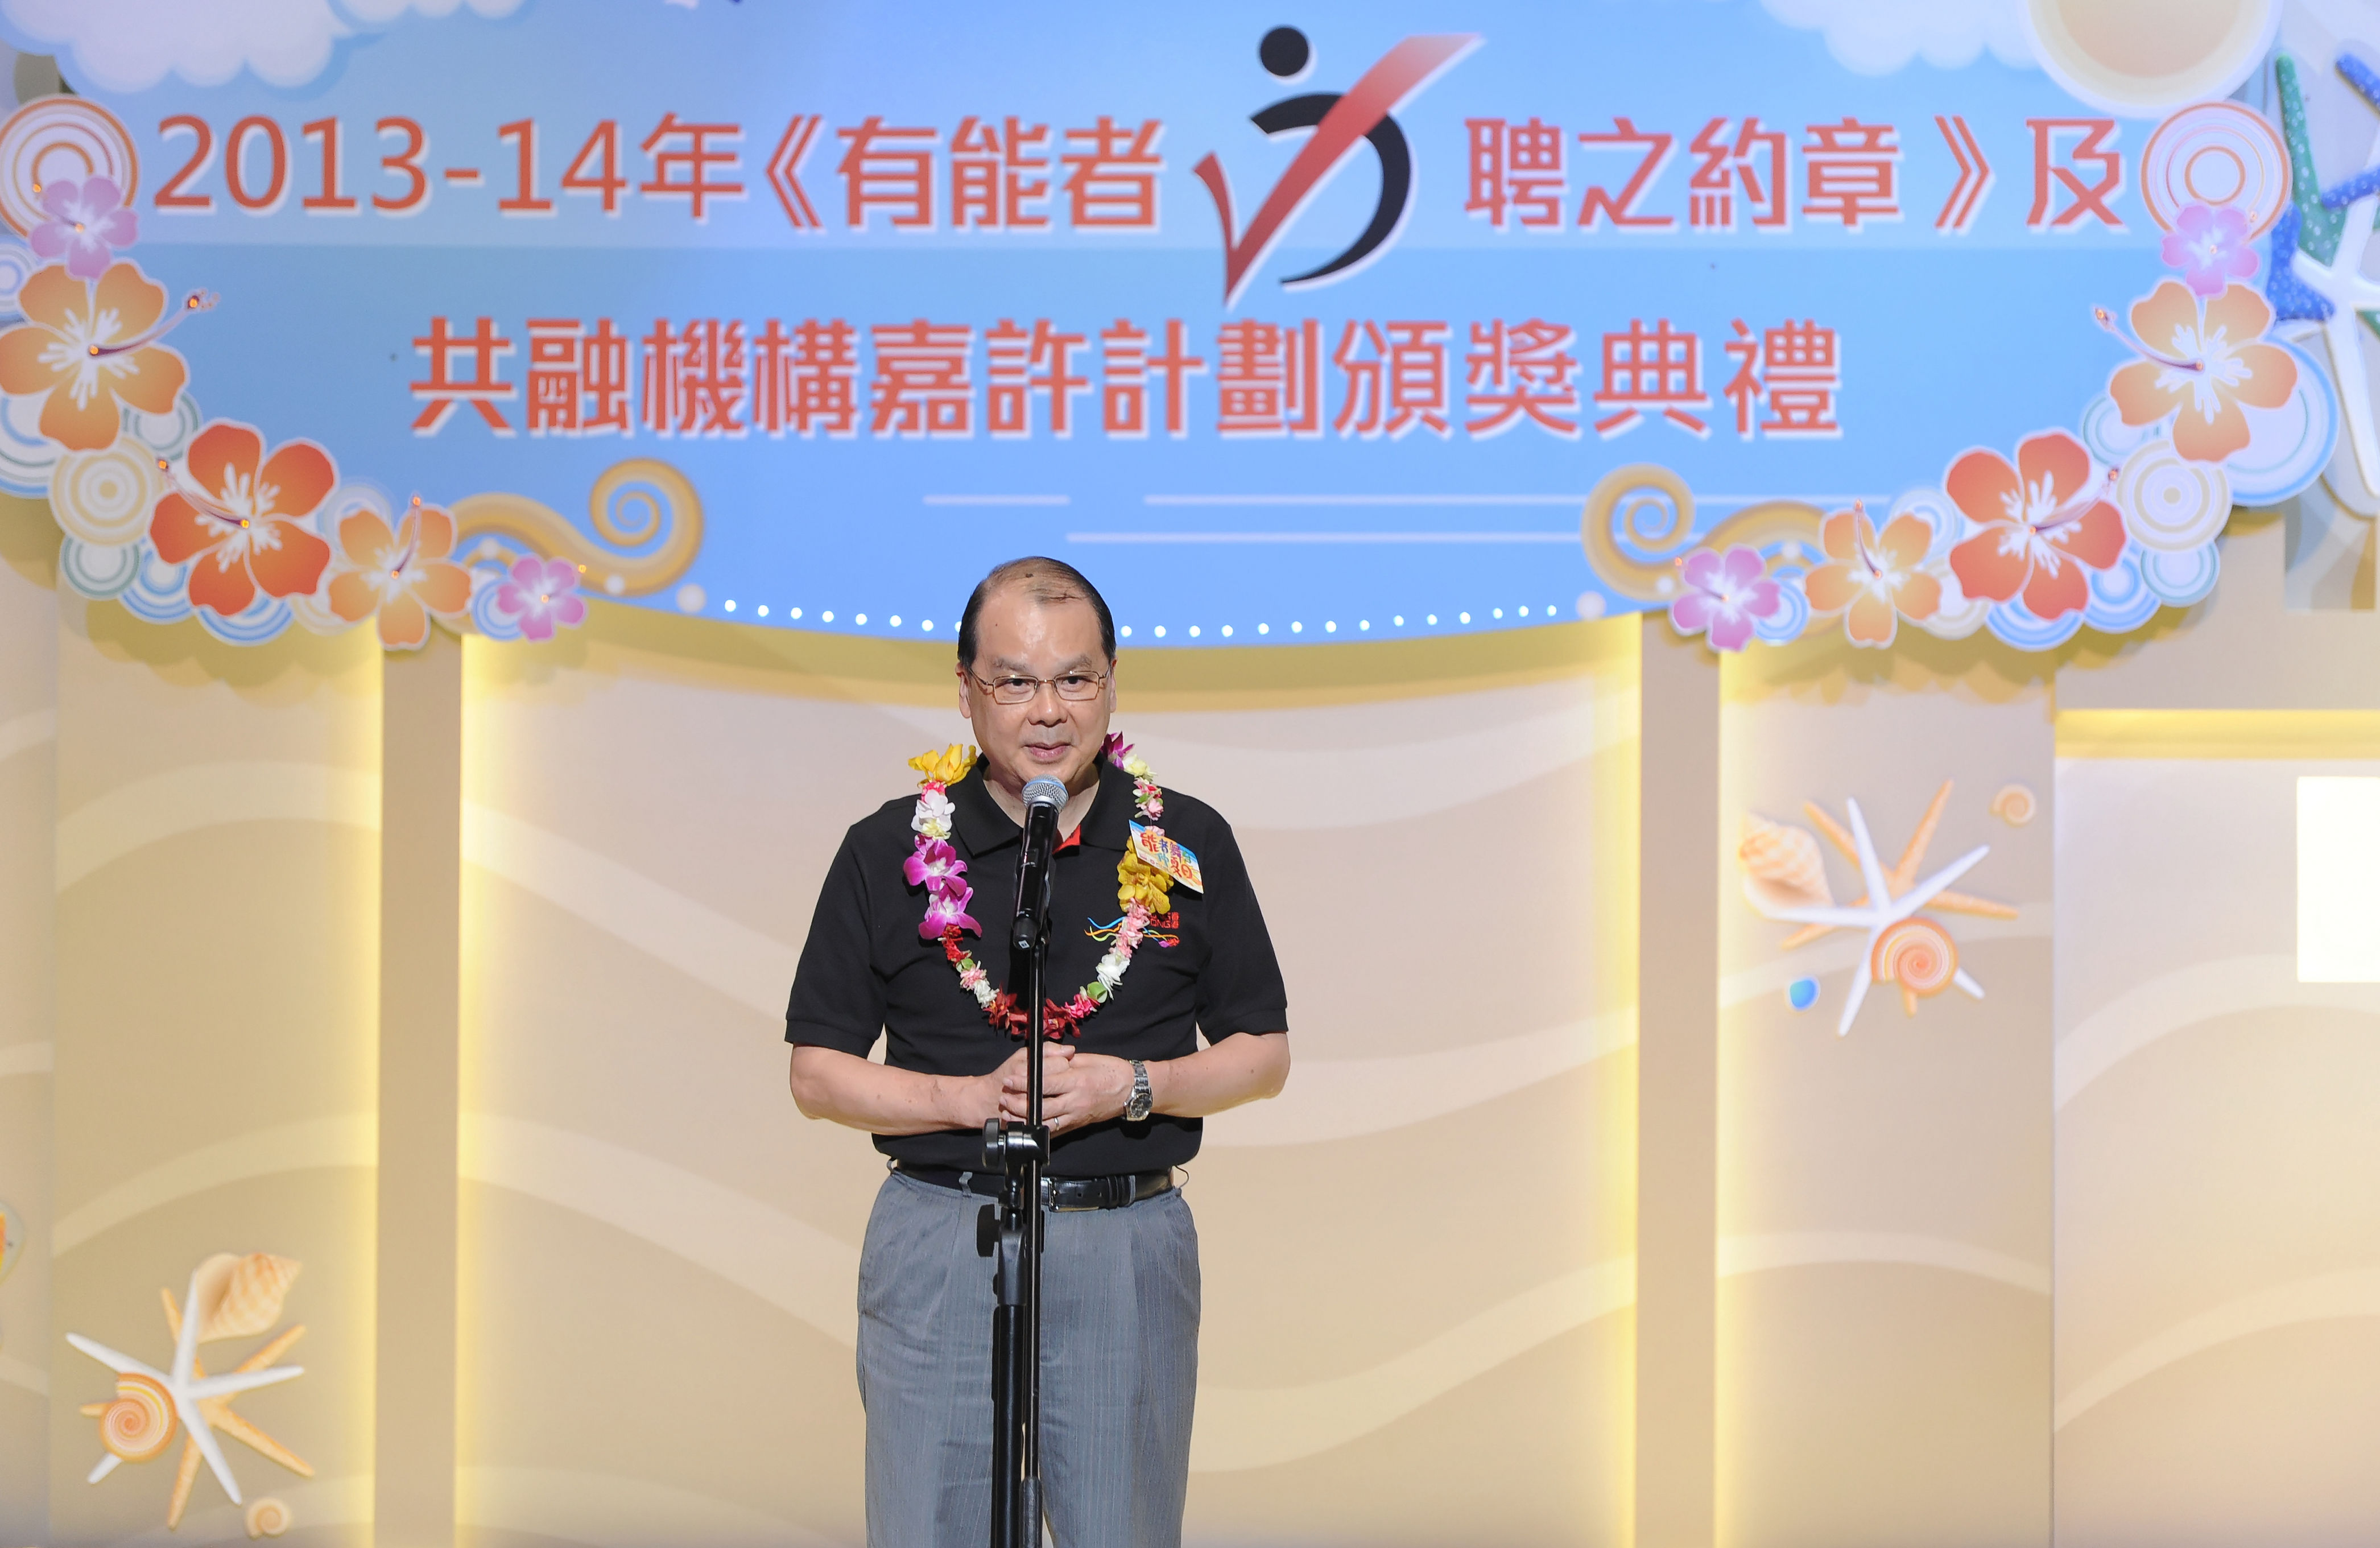 Opening address by the Secretary for Labour and Welfare, Mr. Matthew Cheung Kin-chung, GBS, JP,